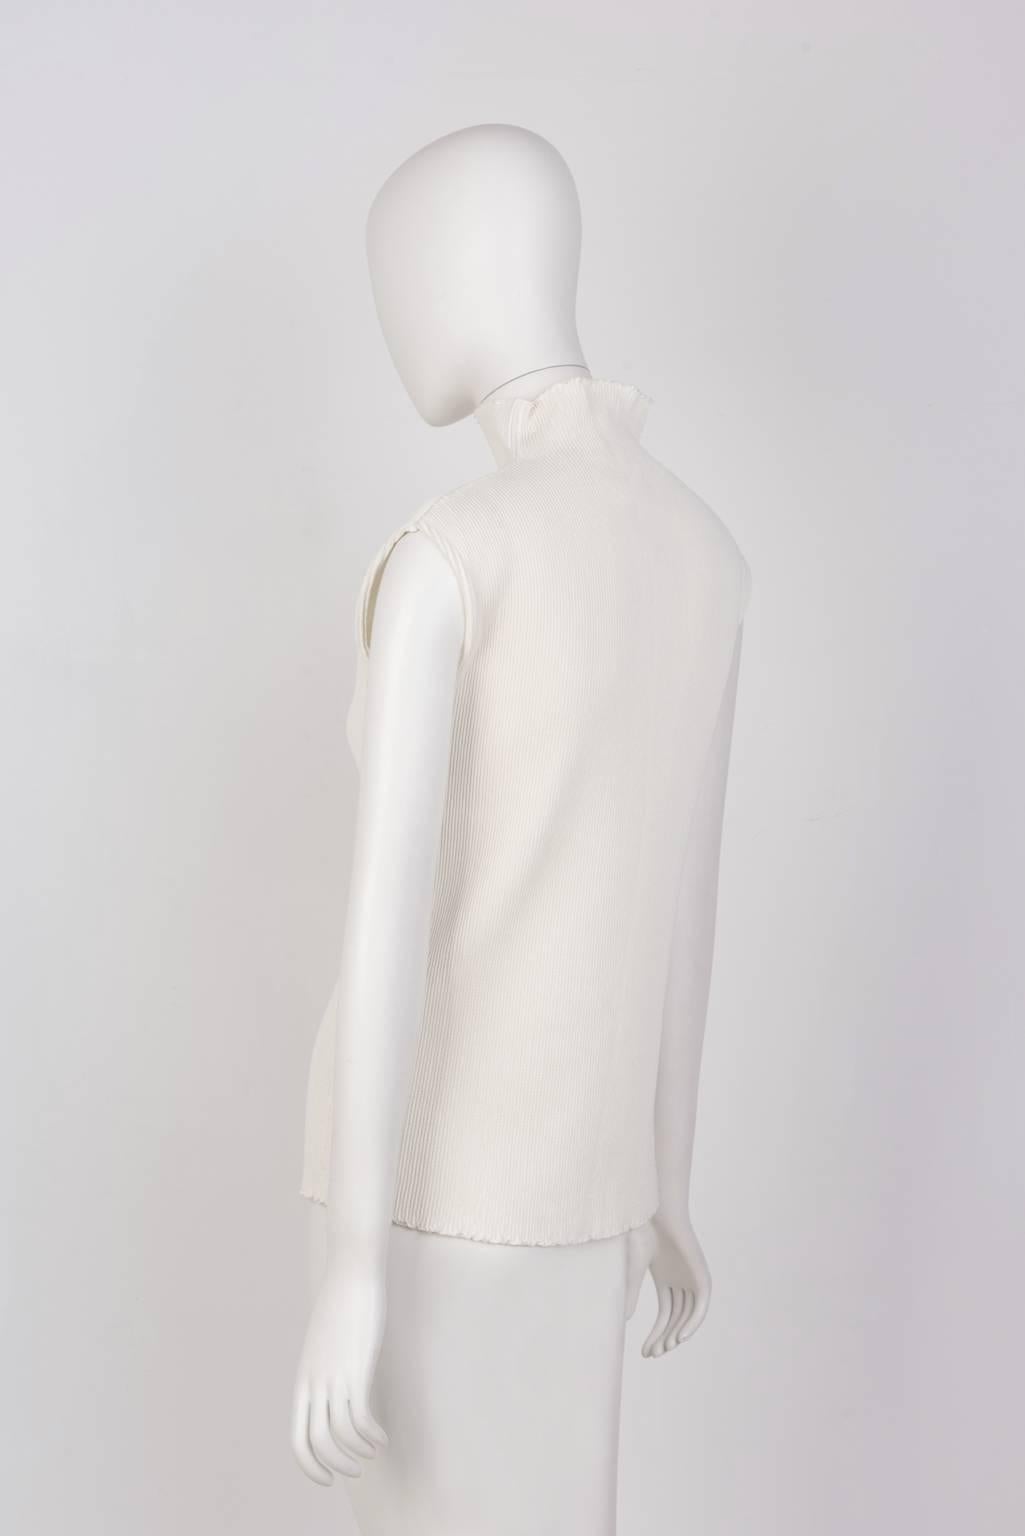 PHOEBE PHILO For CÉLINE Knit Top In Excellent Condition For Sale In Xiamen, Fujian